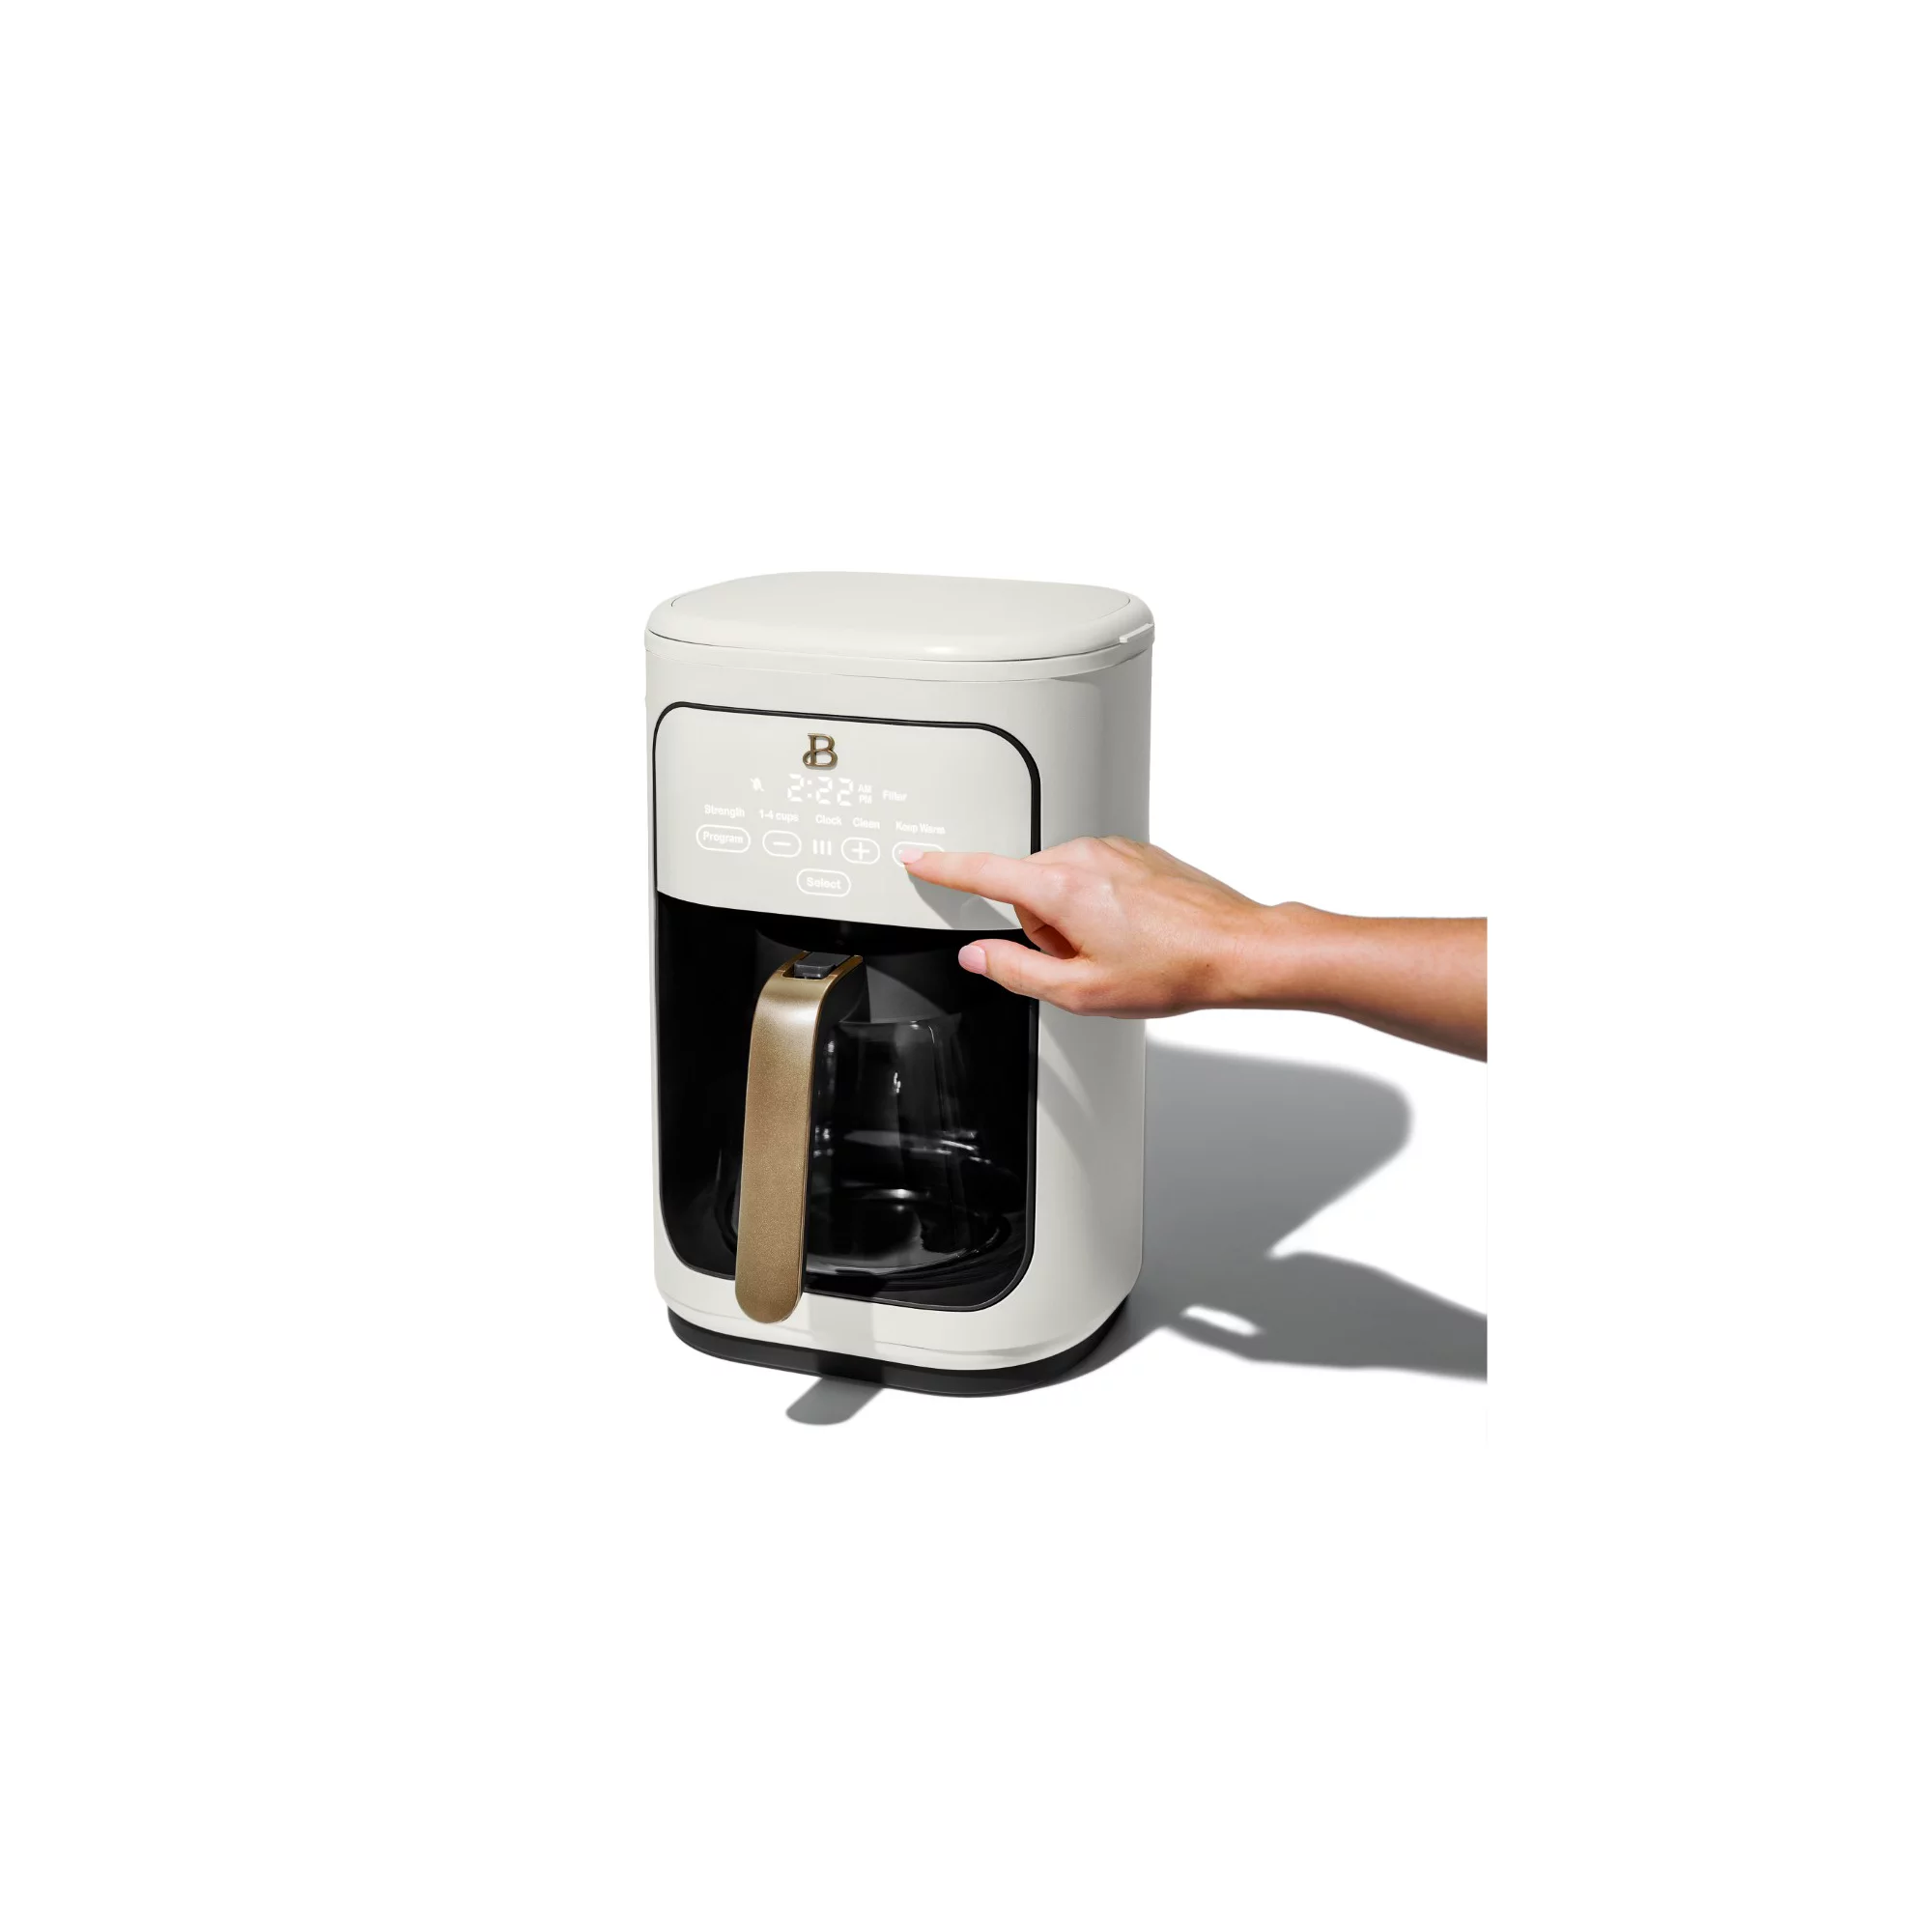 Beautiful 14 Cup Touchscreen Coffee Maker, Black Sesame by Drew